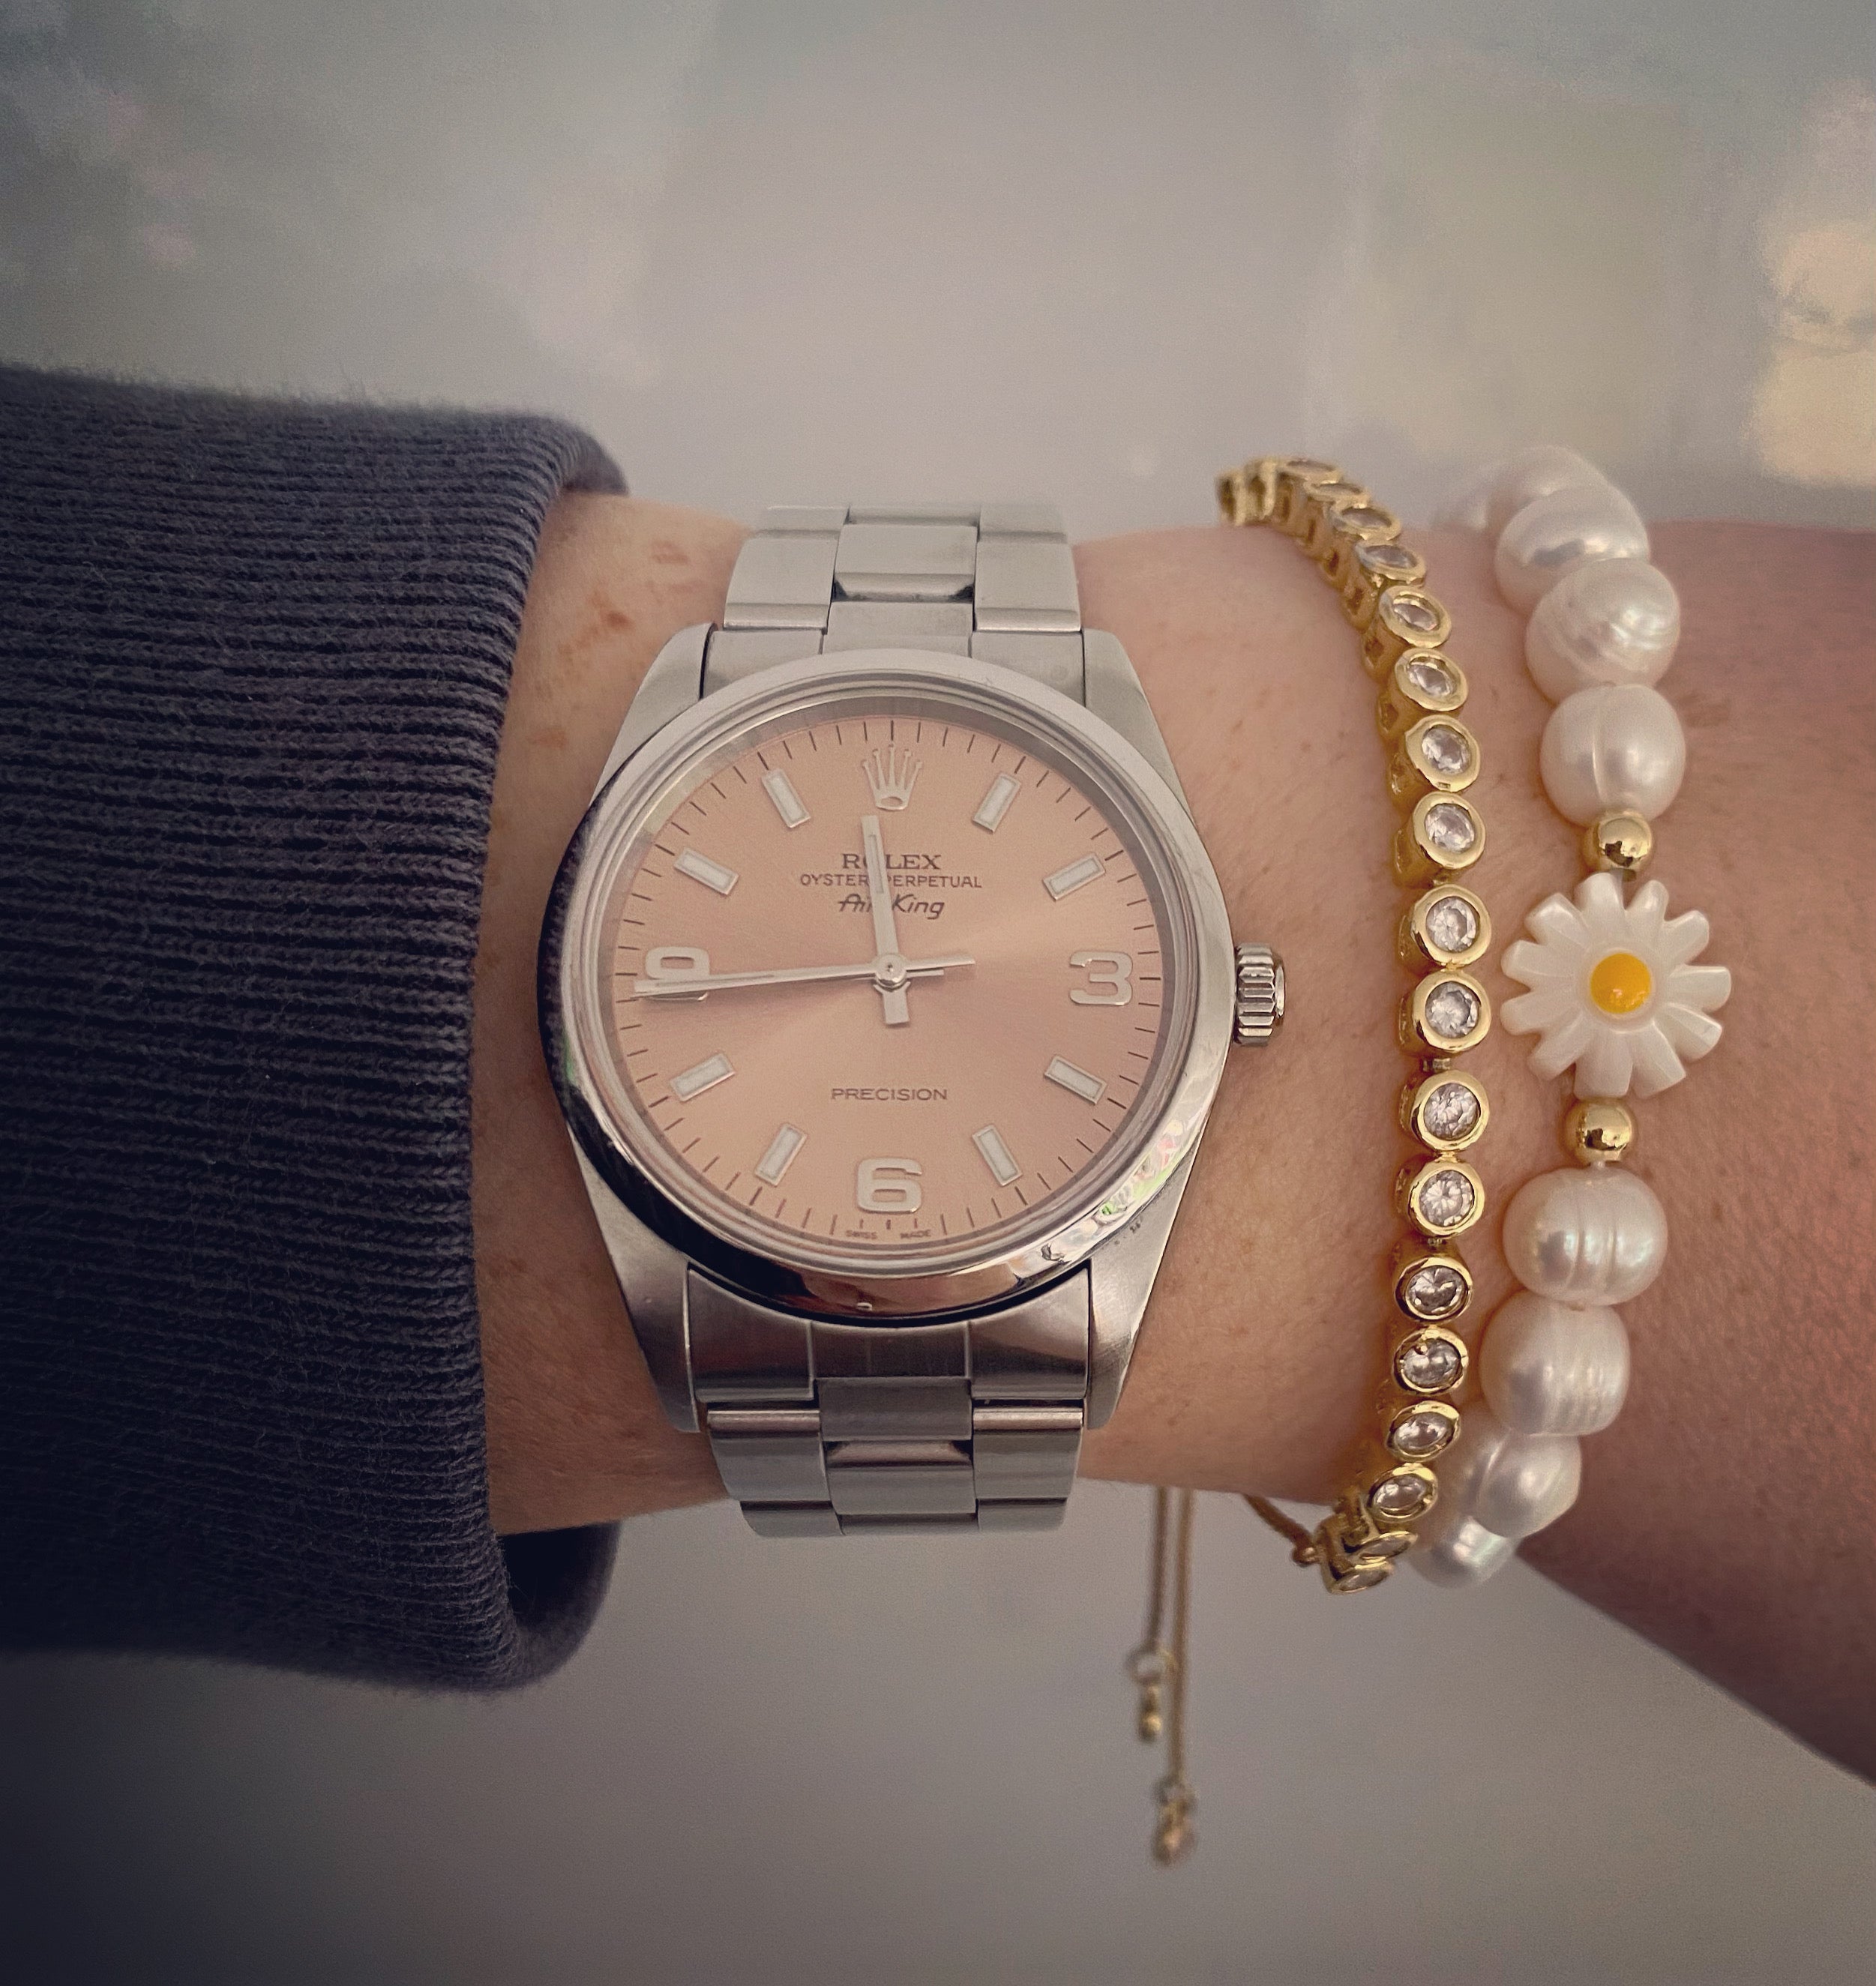 Daisy and pearl bracelet